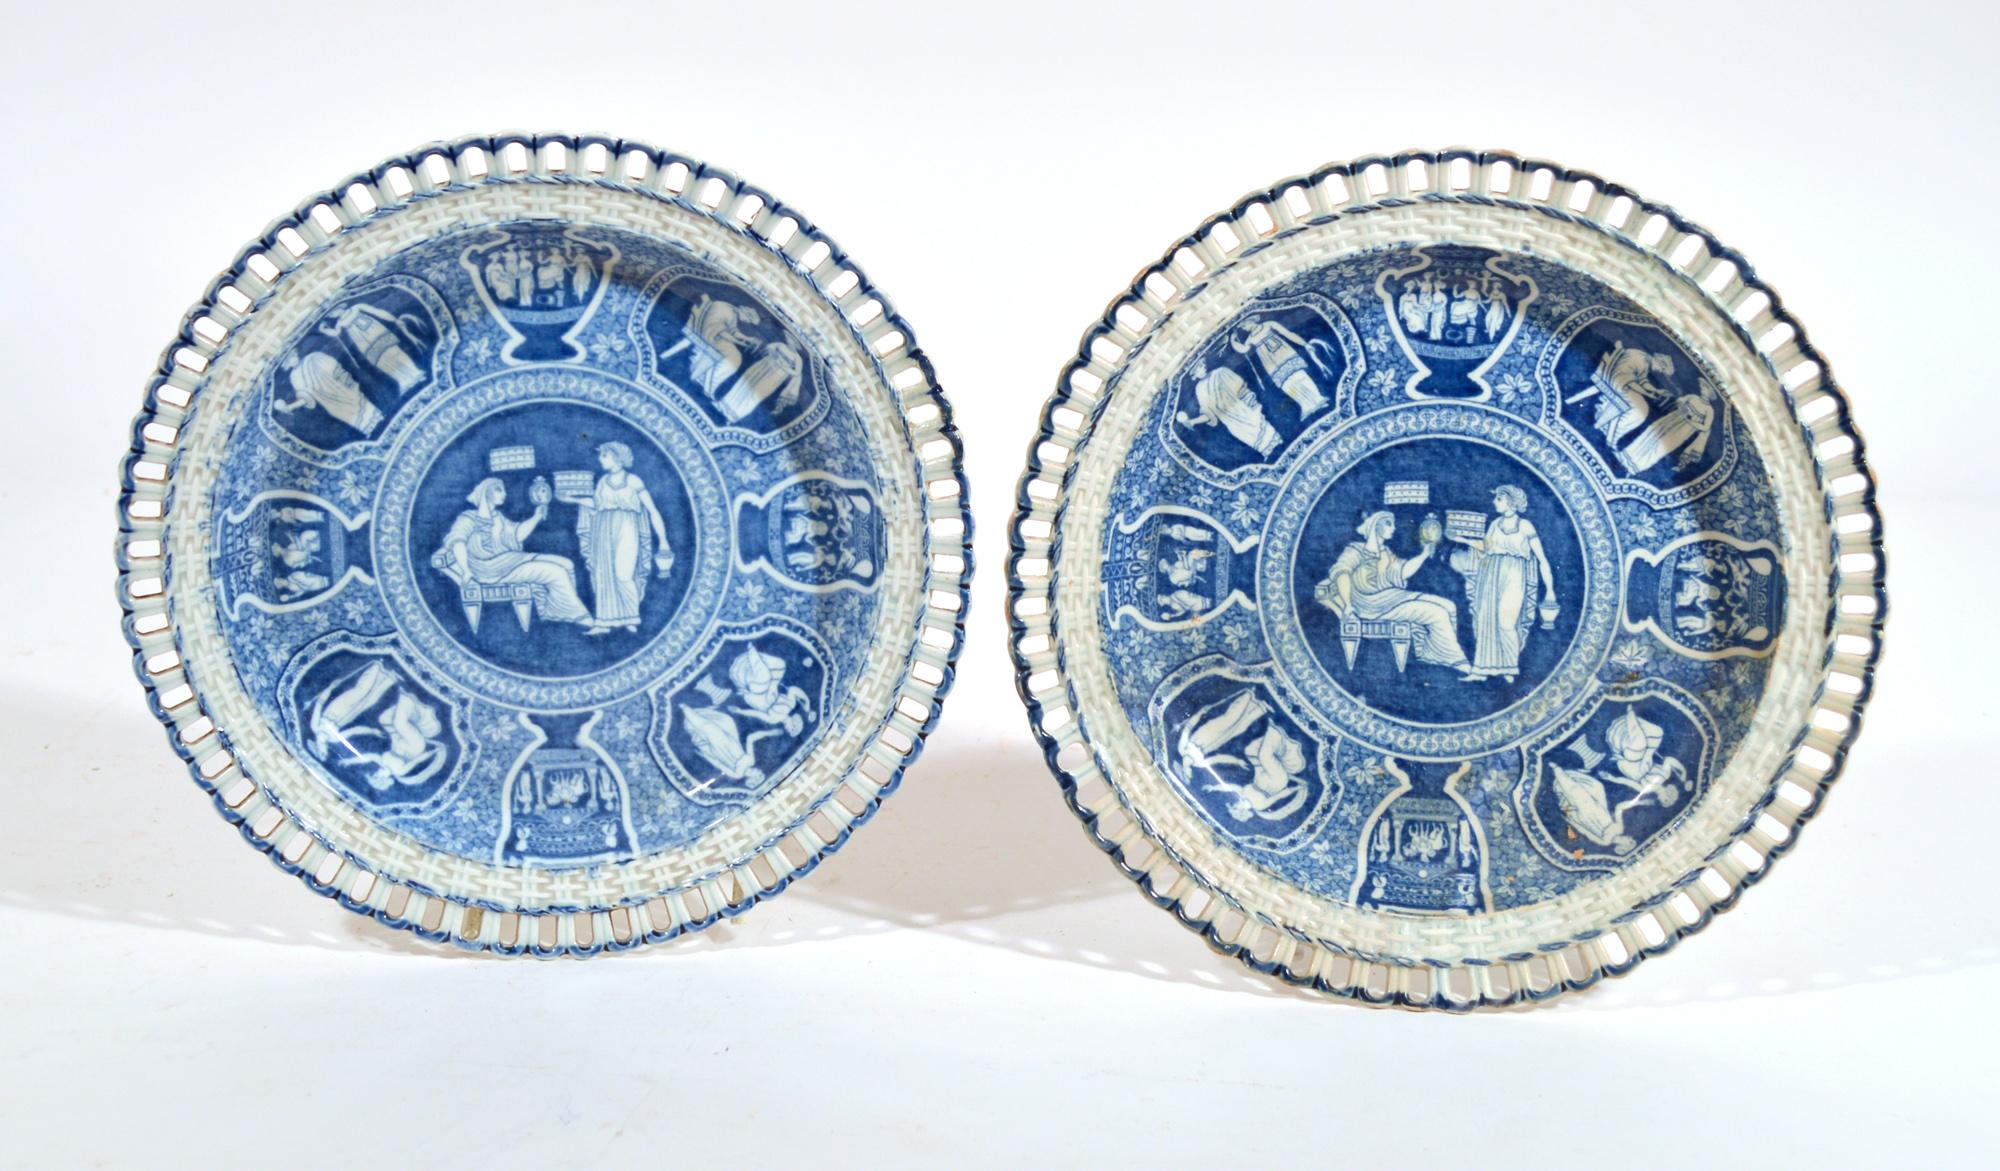 Spode neo-classical Greek pattern blue openwork dessert plates,
Ceres with a Priestess,
Four plates (4)
Early 19th century
From a large collection of Greek pattern Spode- more pieces will be added over time.

The Spode Greek pattern pottery